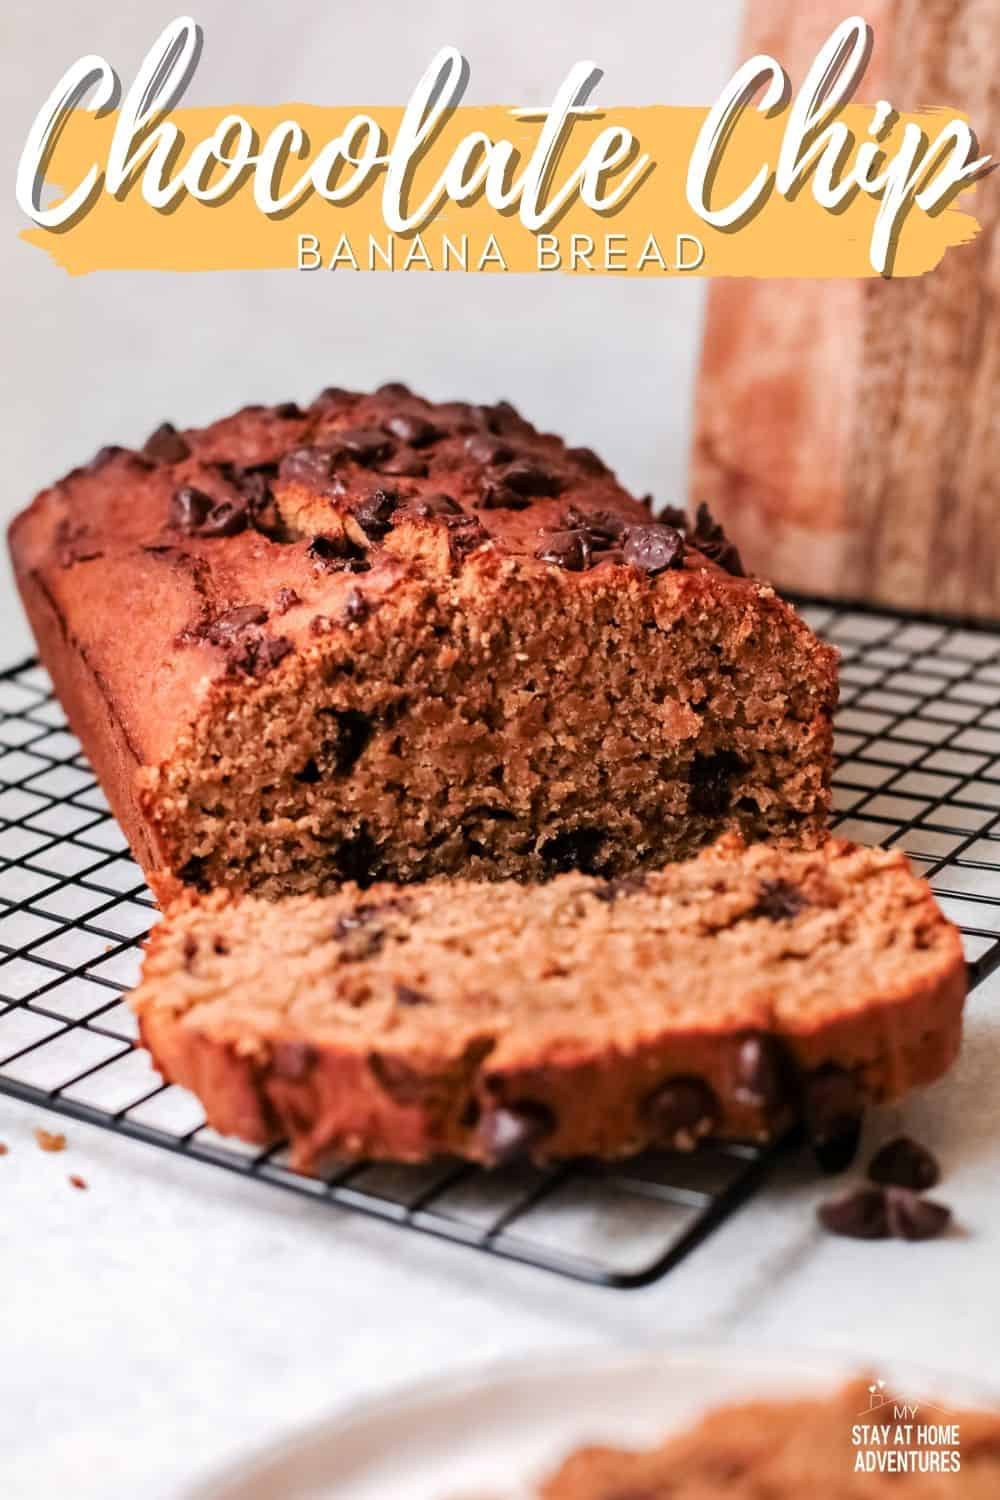 With chocolate chips and banana bread together, everybody’s goin’ bananas. This wonderfully delicious Chocolate Chip Banana Bread is the best! via @mystayathome